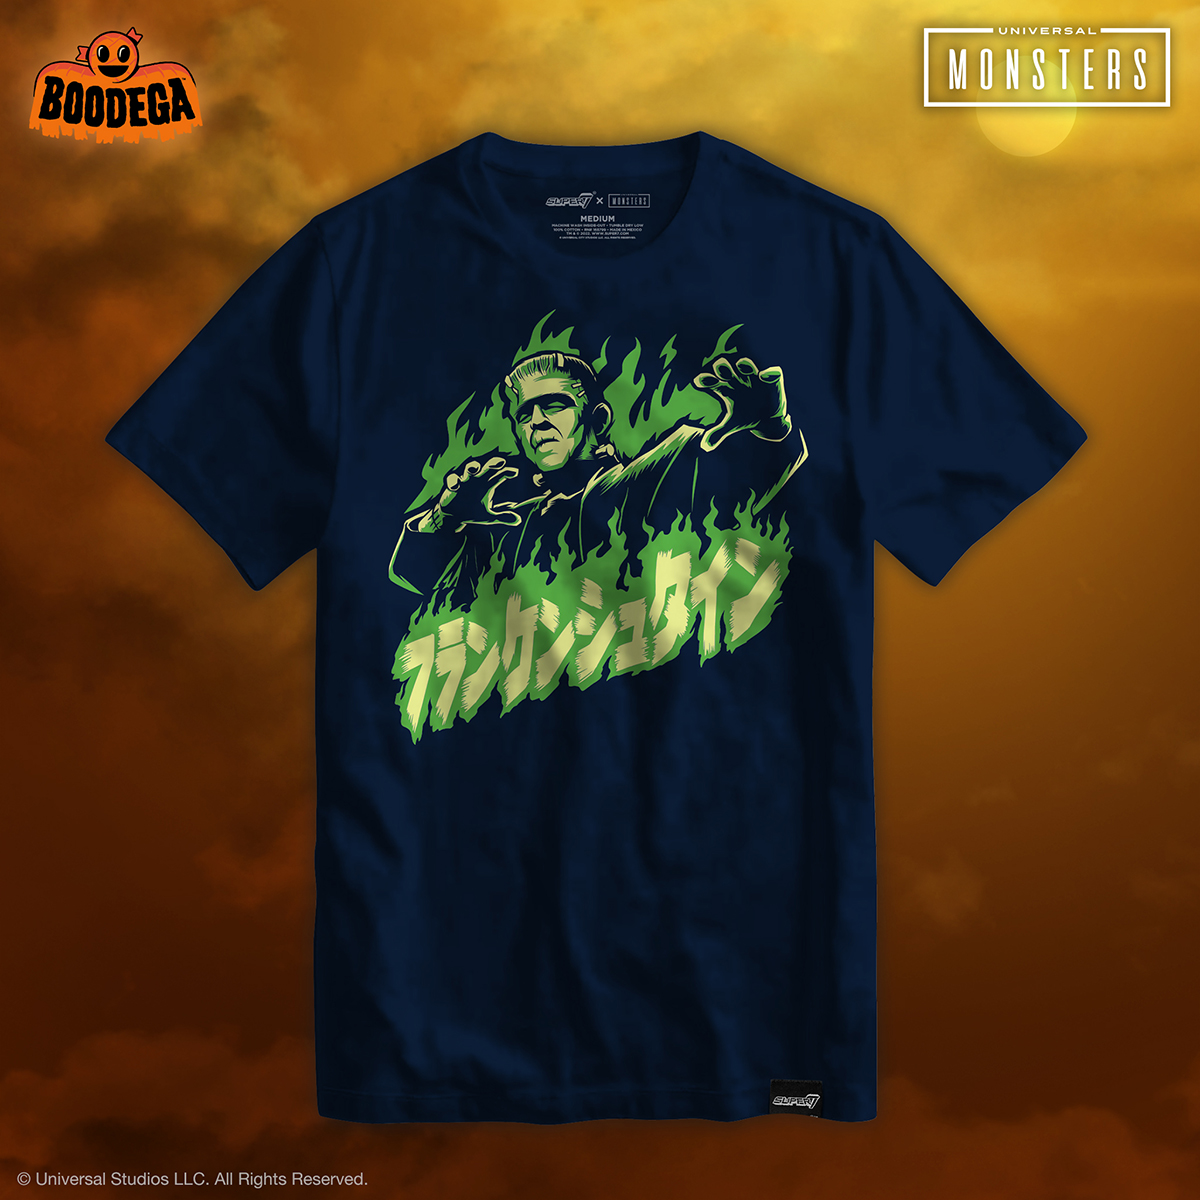 Time isn’t only running out for Frankenstein’s Monster, but also for anyone who wants to add this Boodega edition Universal Monsters Frankenstein ReAction Figure to their collection! Available now on Super7.com. Also available is the Frankenstein Fire tee!